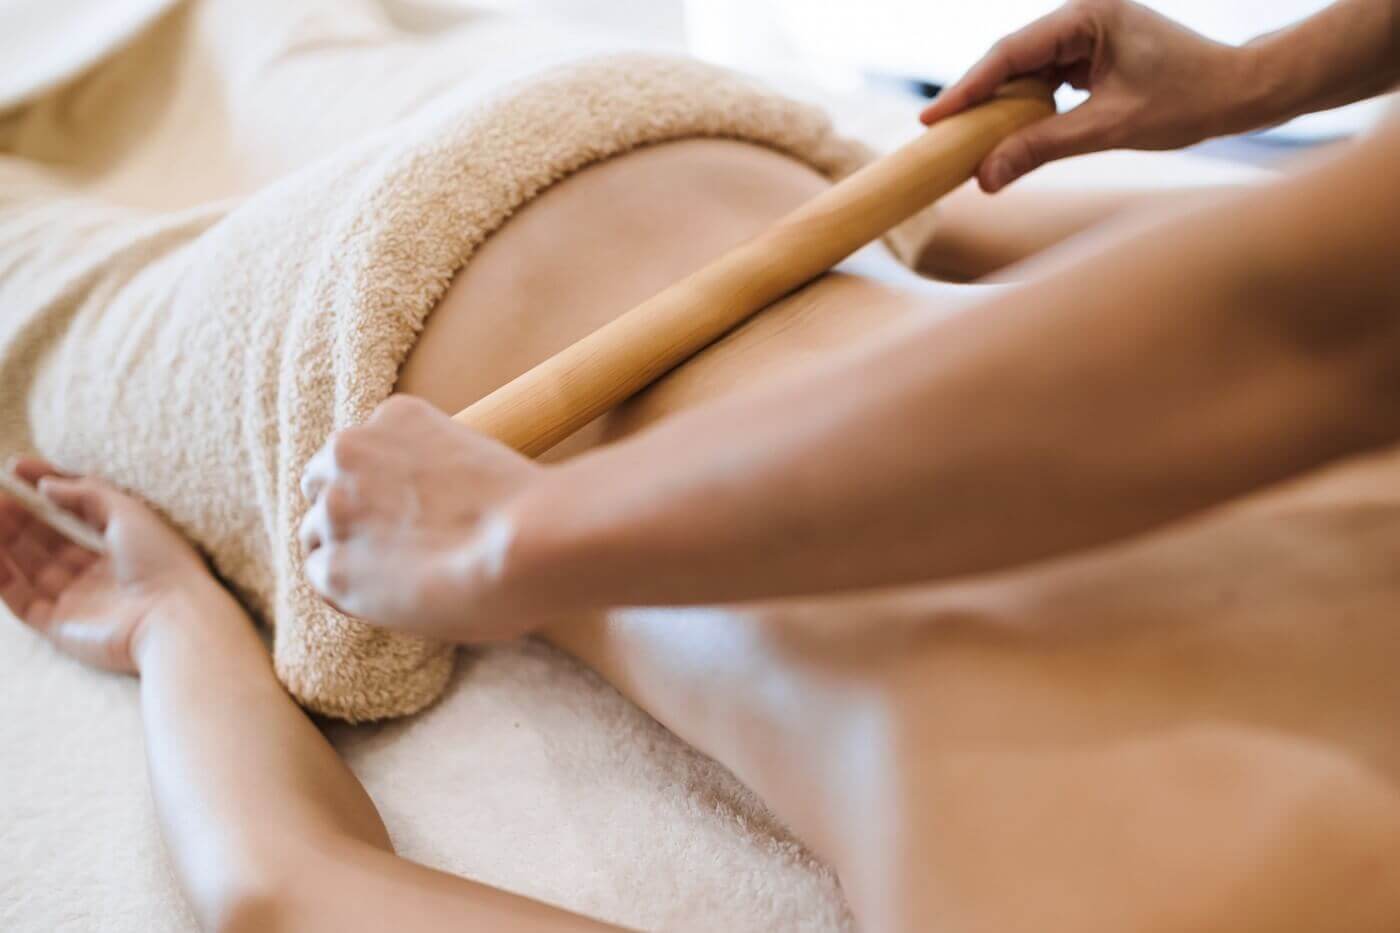 Danang Bamboo Massage: A relaxing and therapeutic massage that uses bamboo sticks to relieve stress